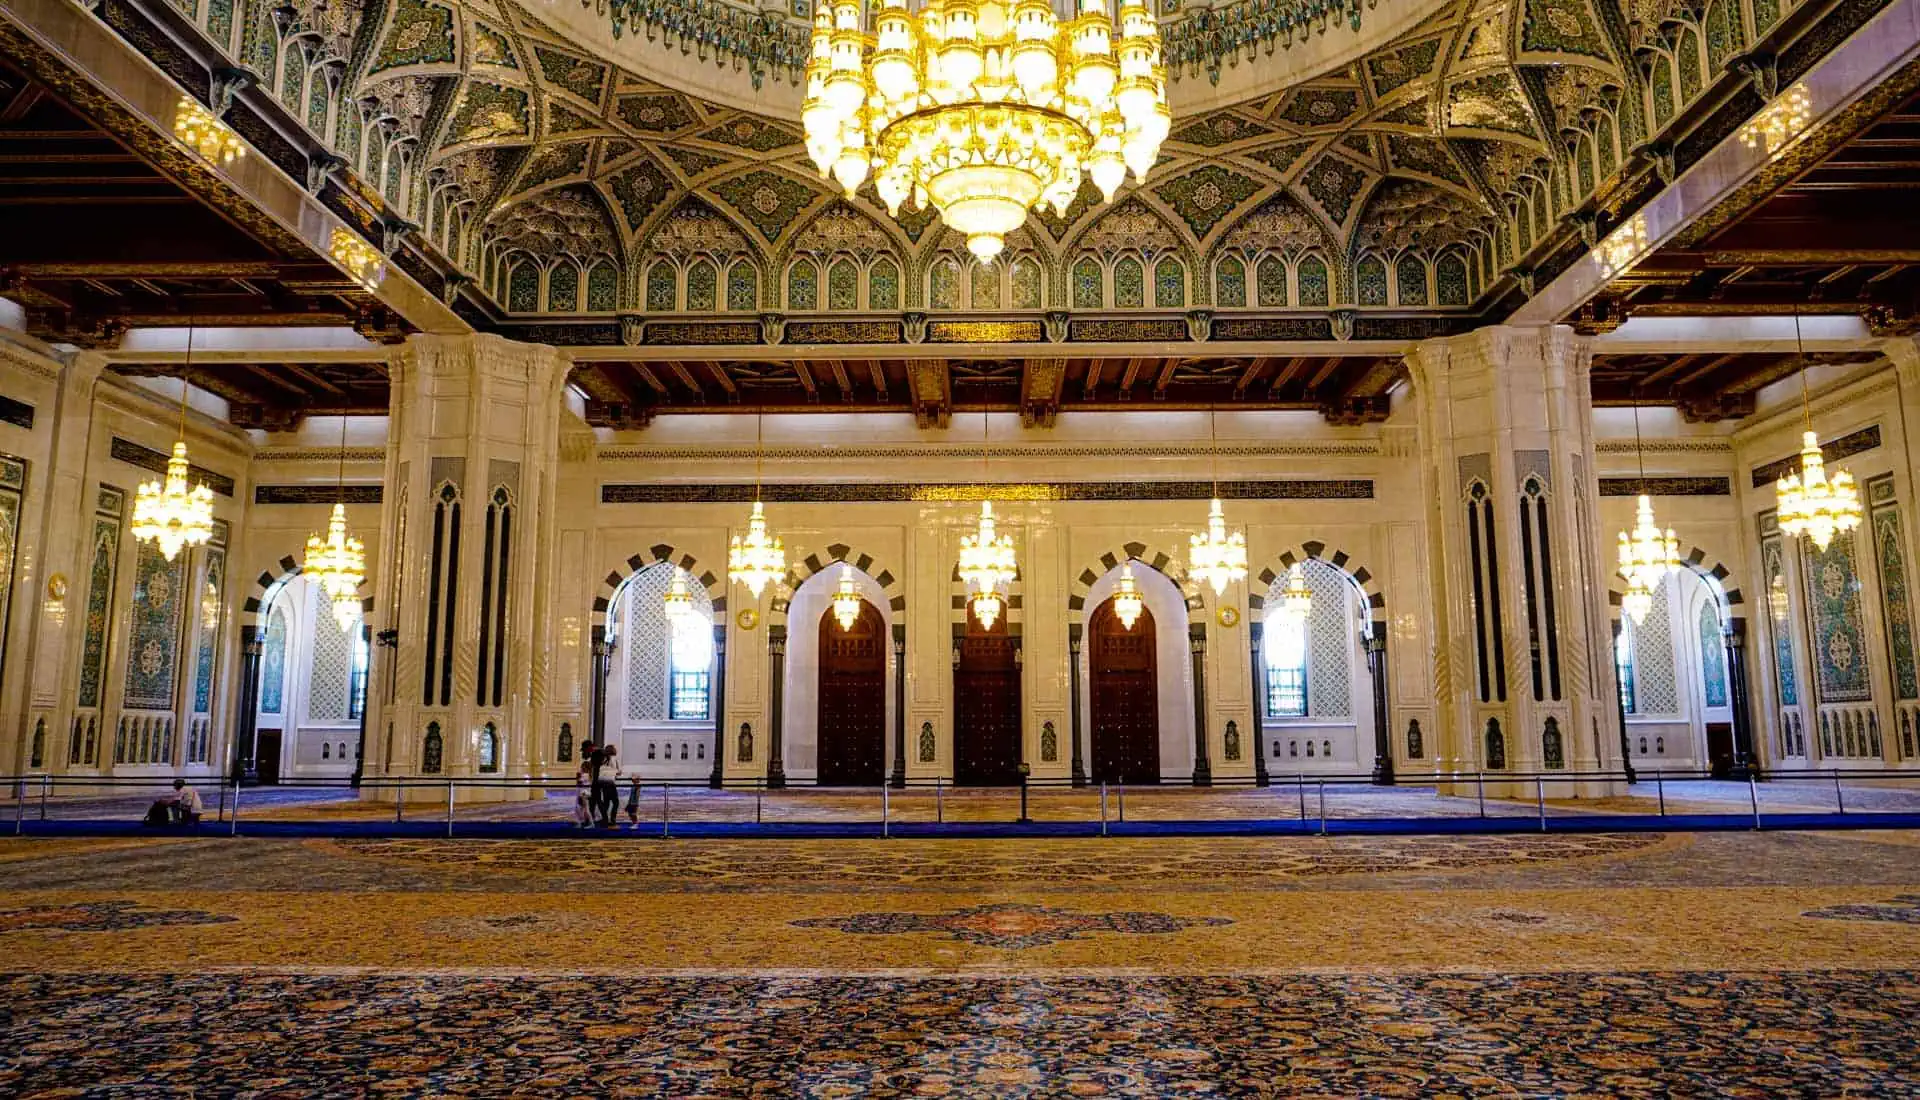 The interior of Sultan Qaboos Grand Mosque is something to behold and should be included in any Muscat itinerary.